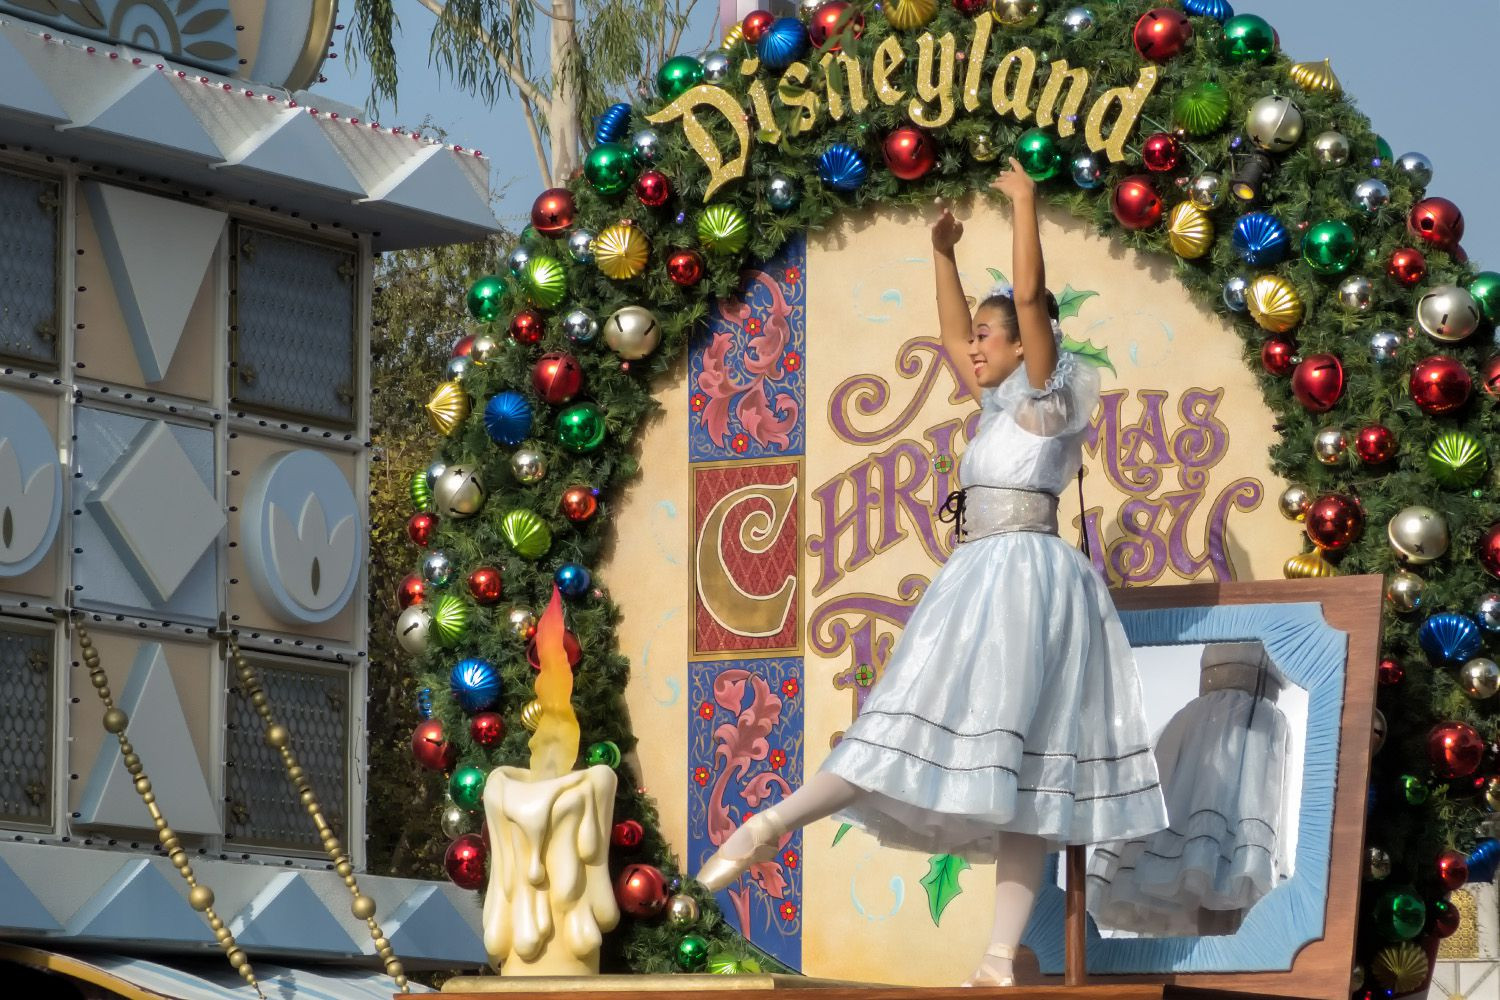 South Gate Christmas Parade
 Going to Disneyland at Christmas Pros and Cons